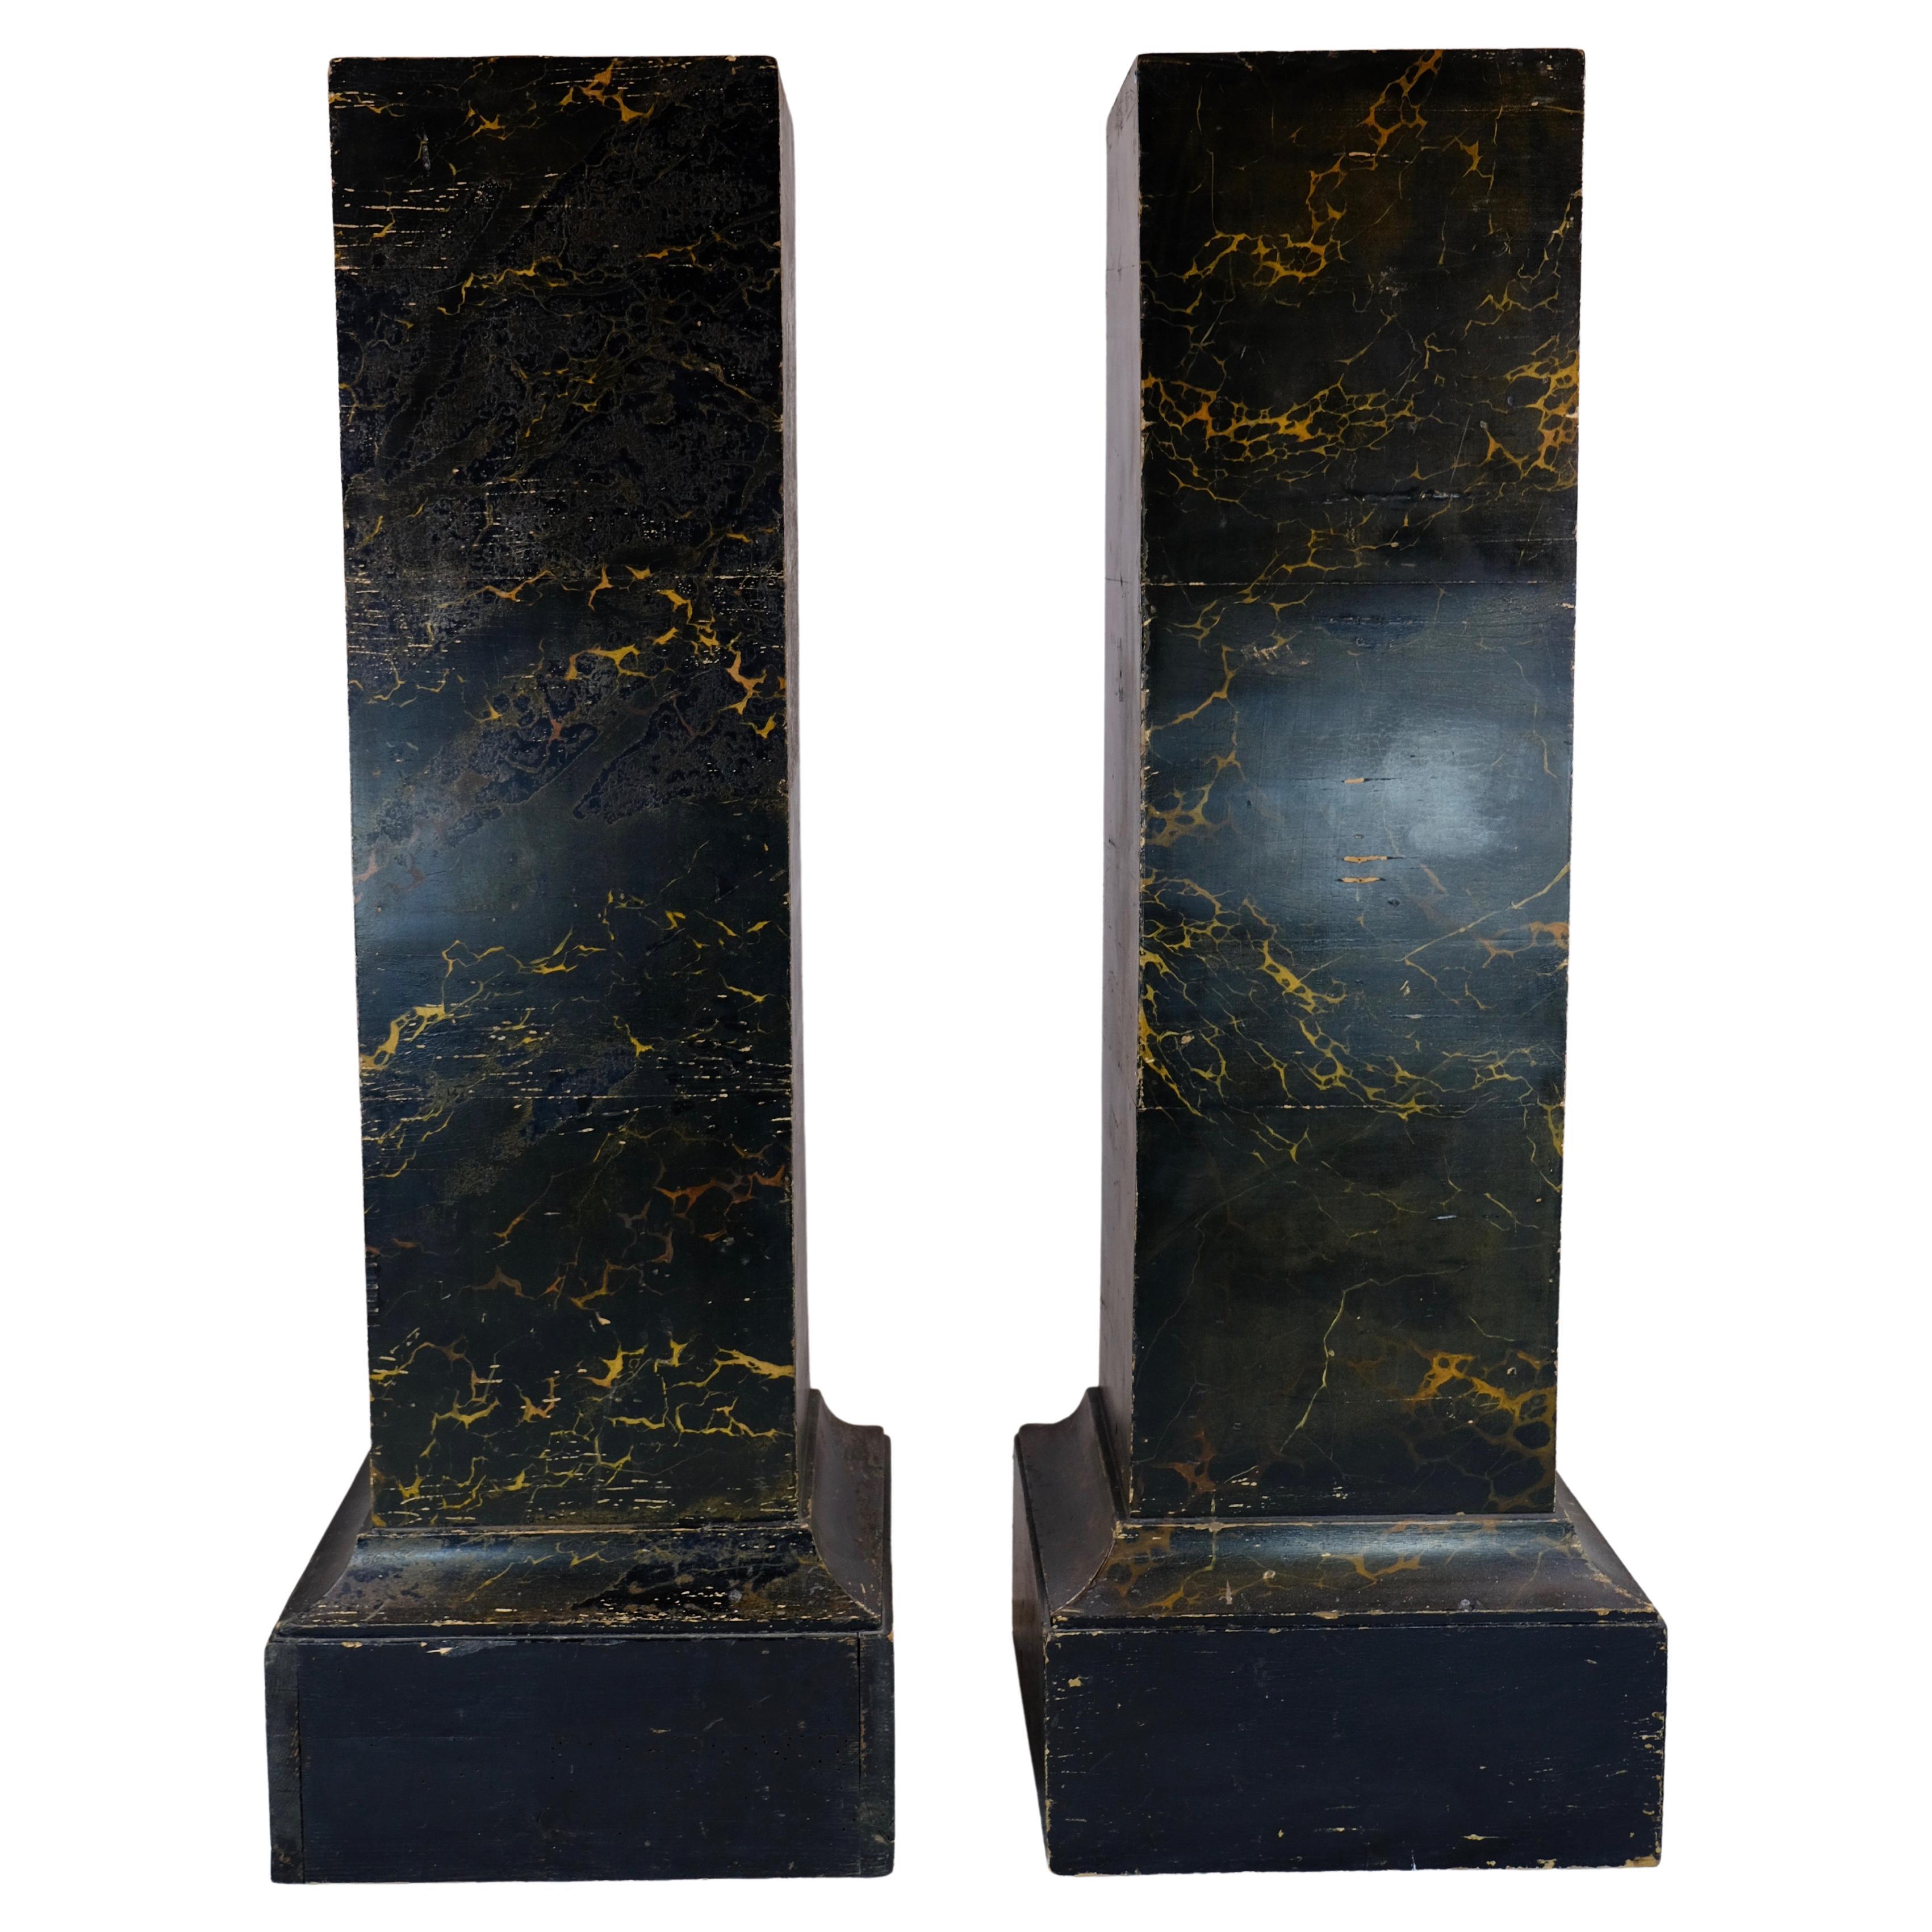 A pair of pillars made of wood and painted in marble imitation (original). Made around year 1800. These pillars are great in any interior to put sculptures, candelabras or anything else on.